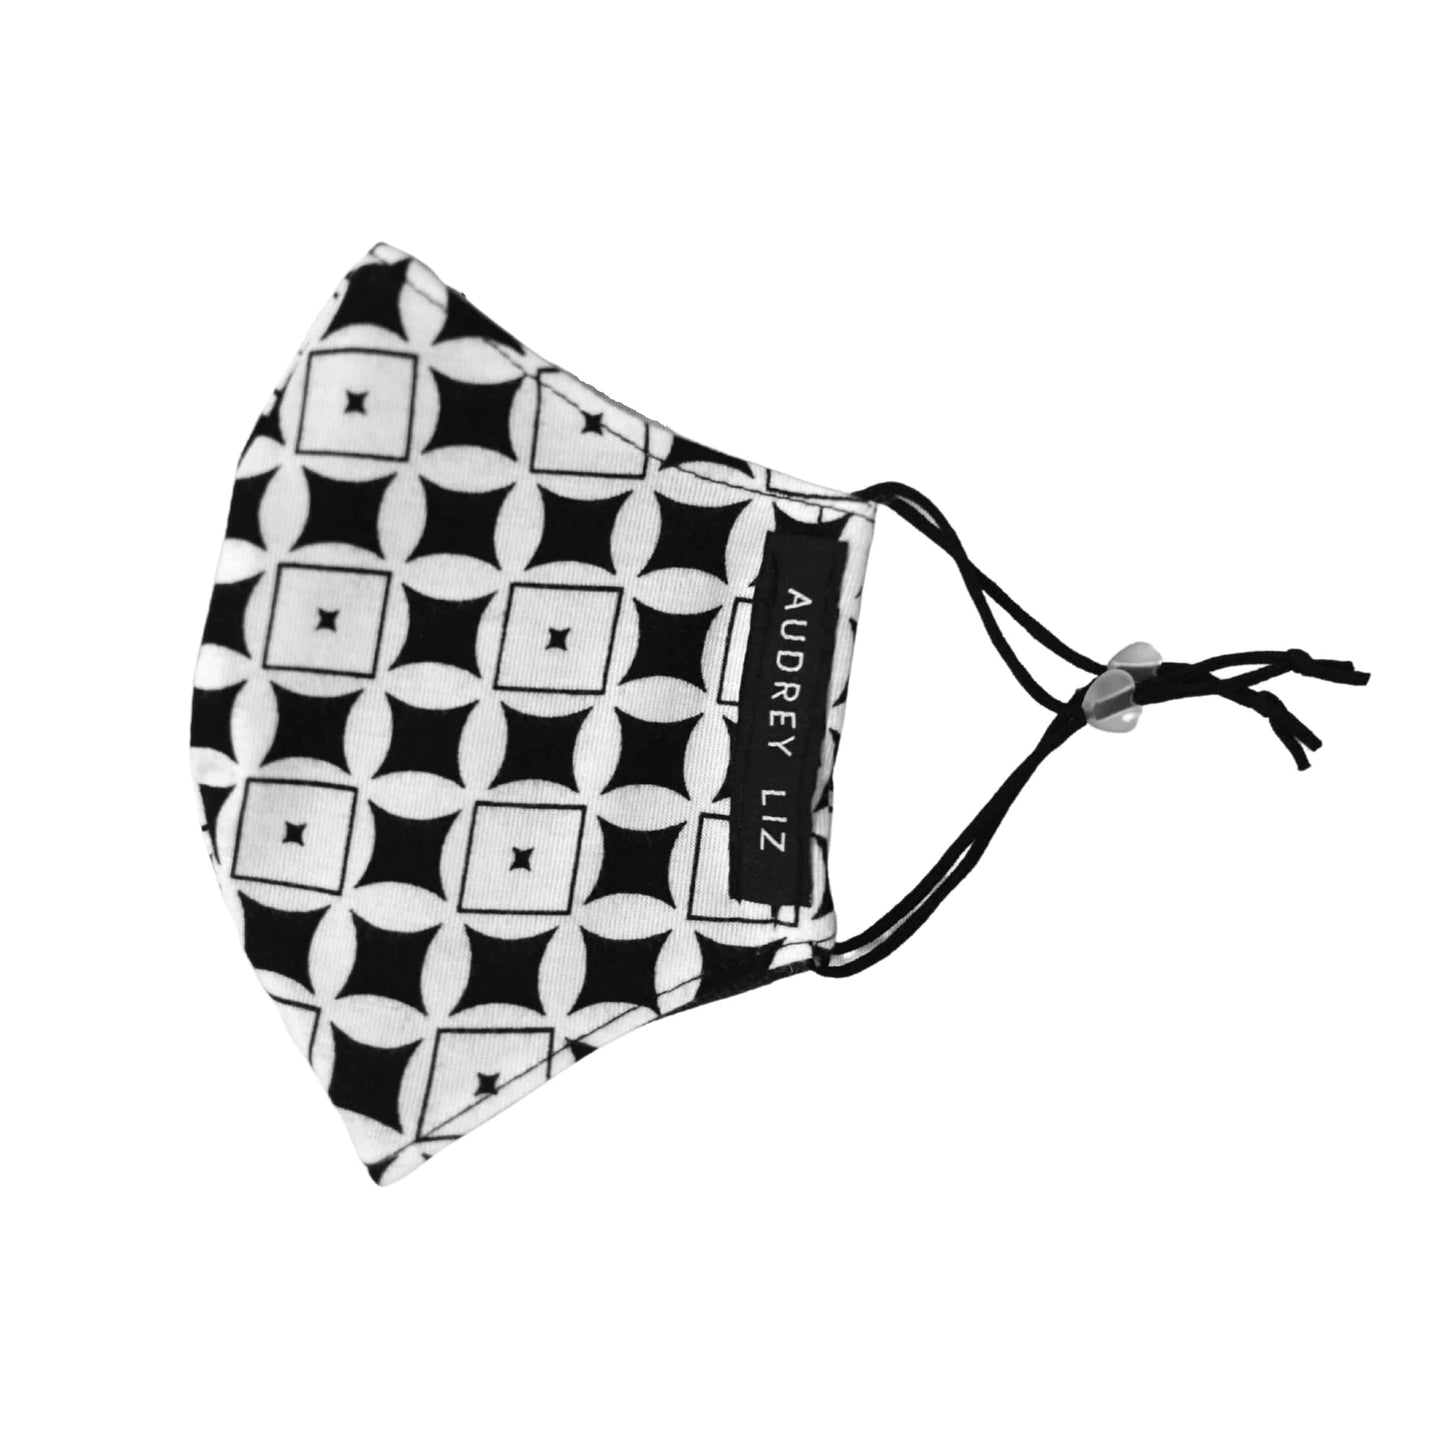 Cloth face mask in a black and white geometric print, with adjustable elastic ear loops.